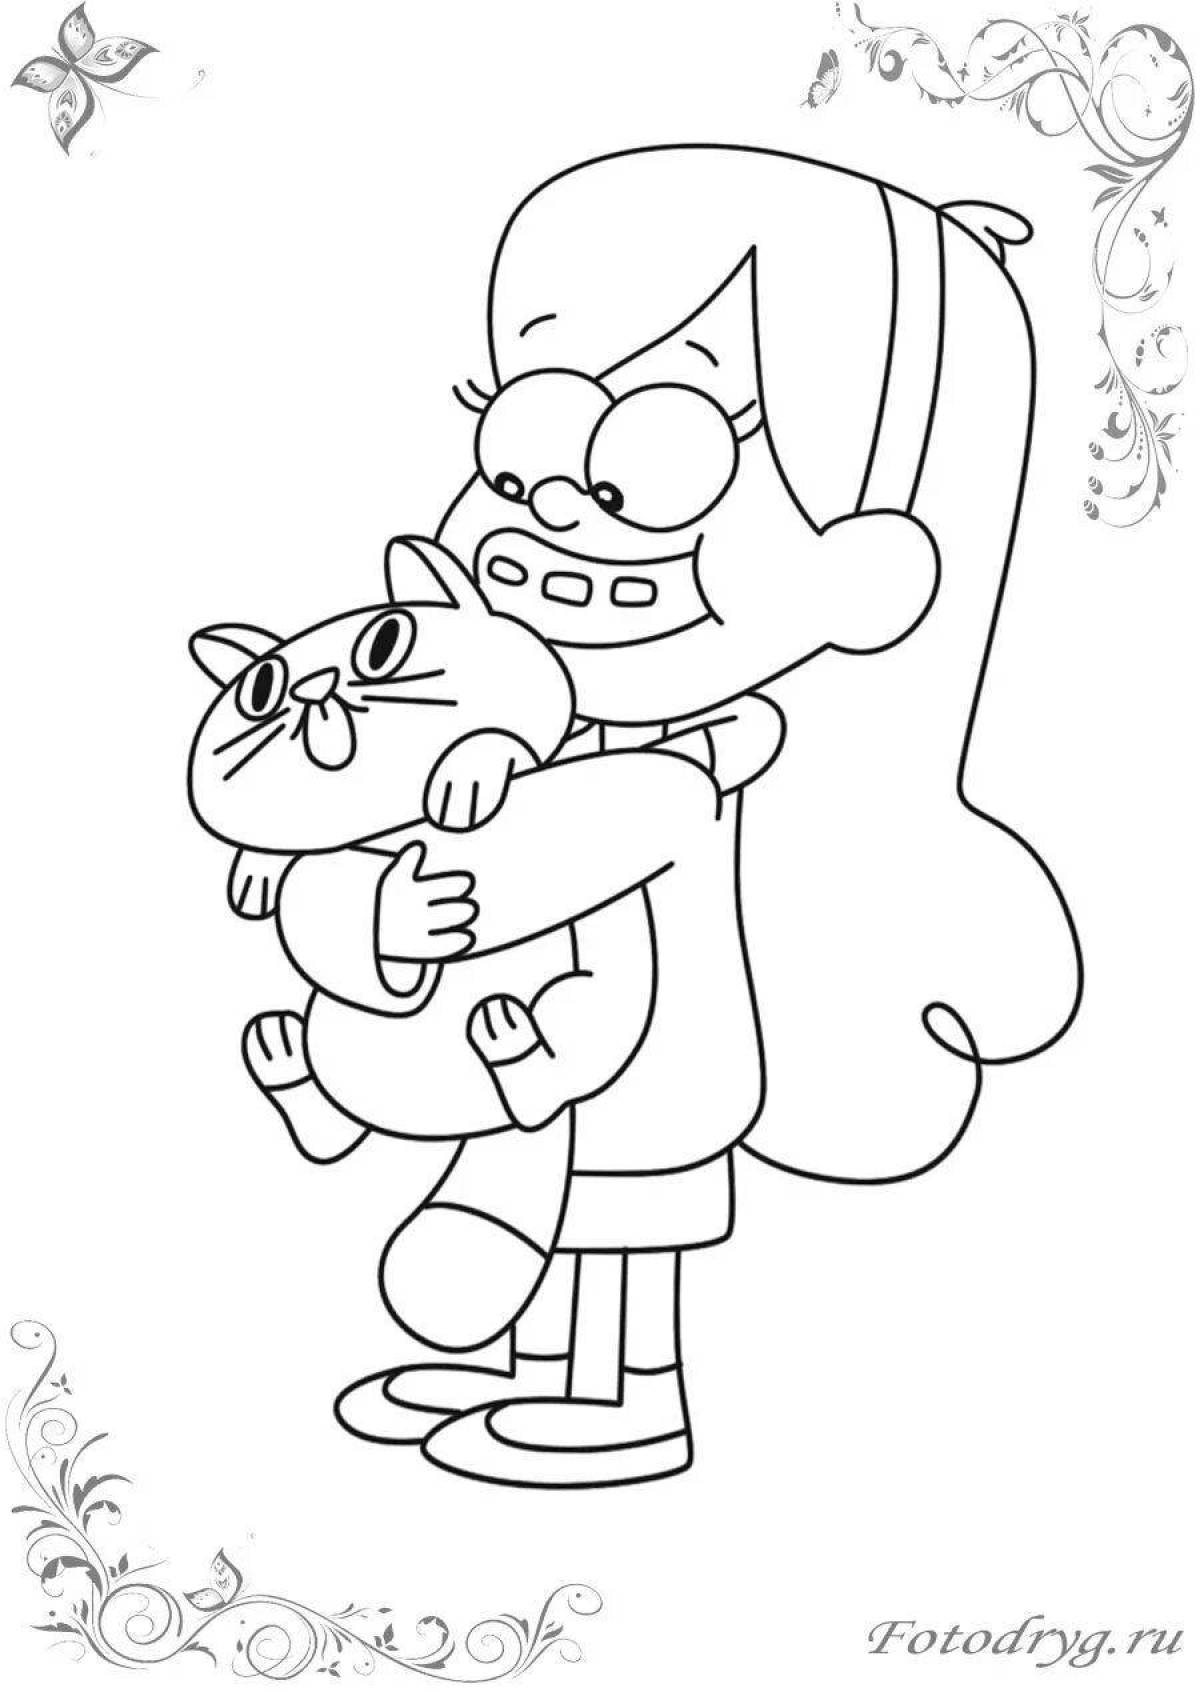 Playful family of gravity falls